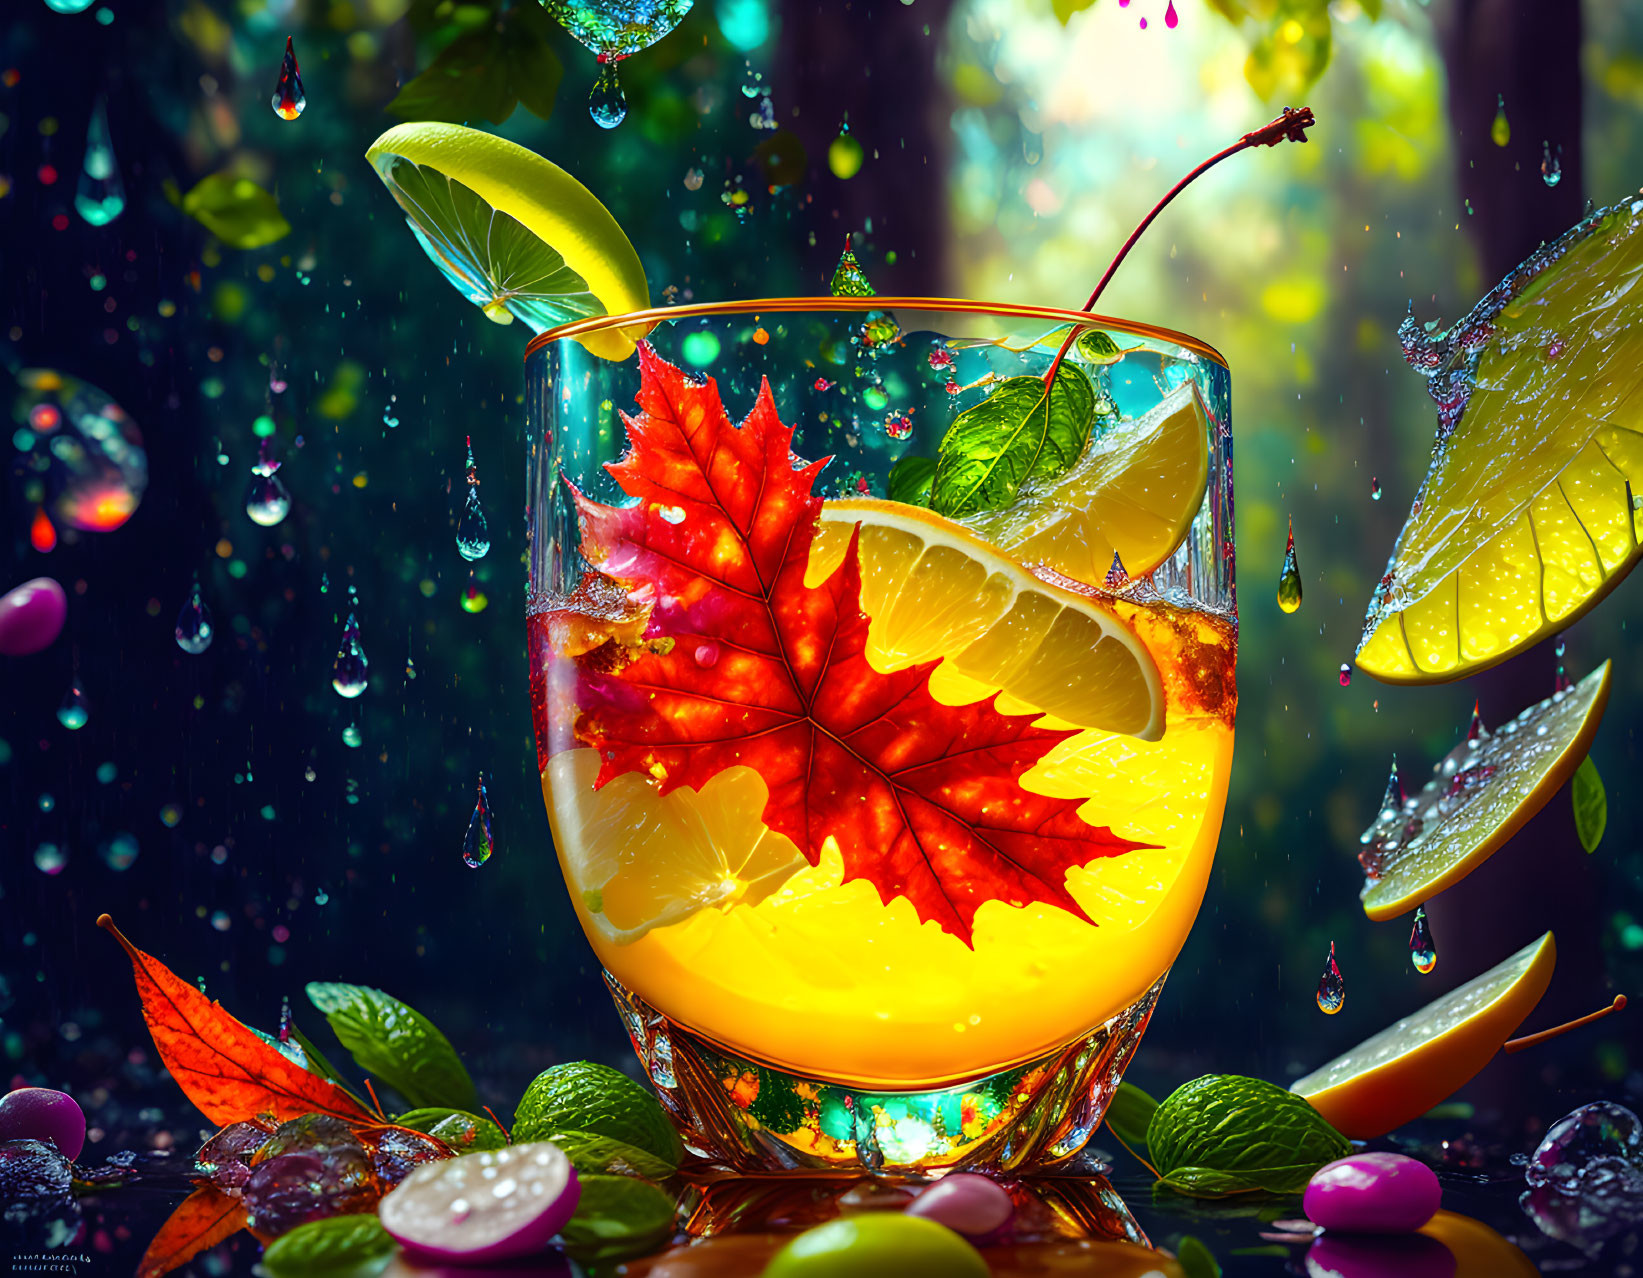 Colorful autumn leaf glass with golden liquid and nature elements